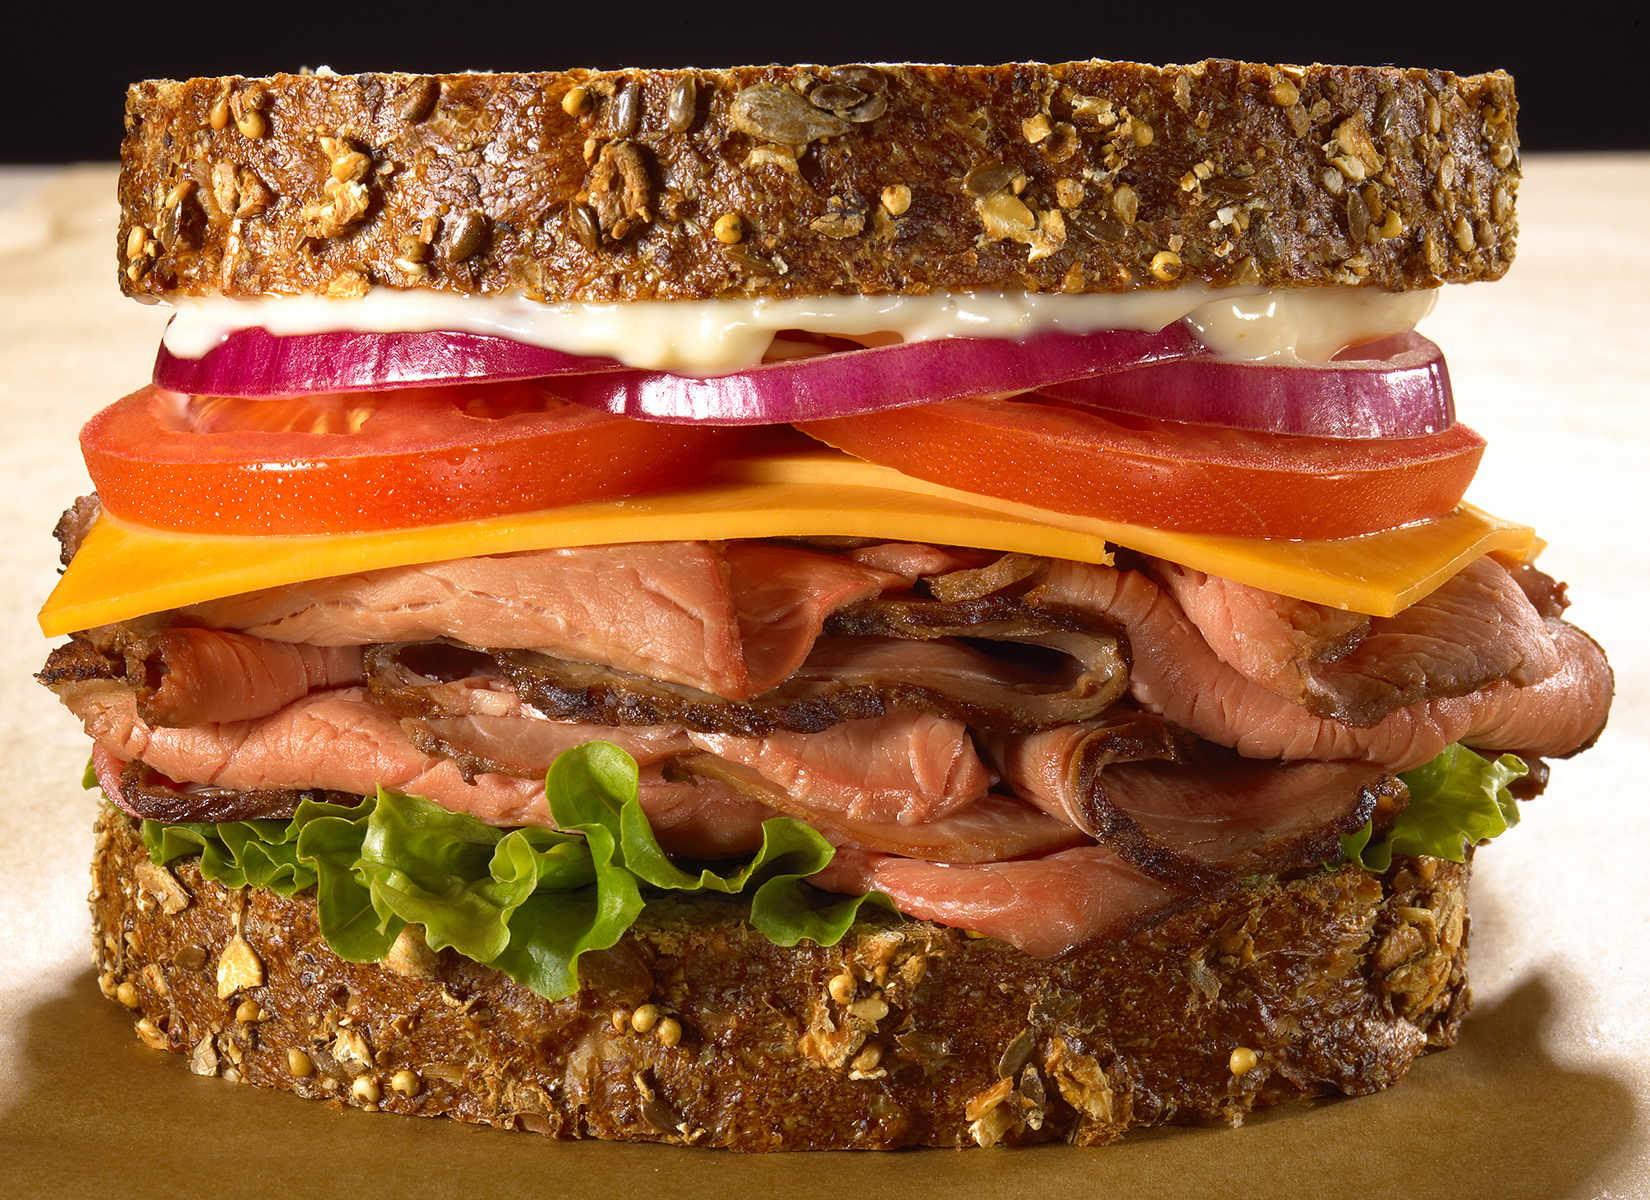  <font size="-3">RoastBeef,sandwich</font> : FOOD : Philadelphia NY Advertising and Event Photography - Best Food packaging Menu and Lifestyle Photographer - Todd Trice